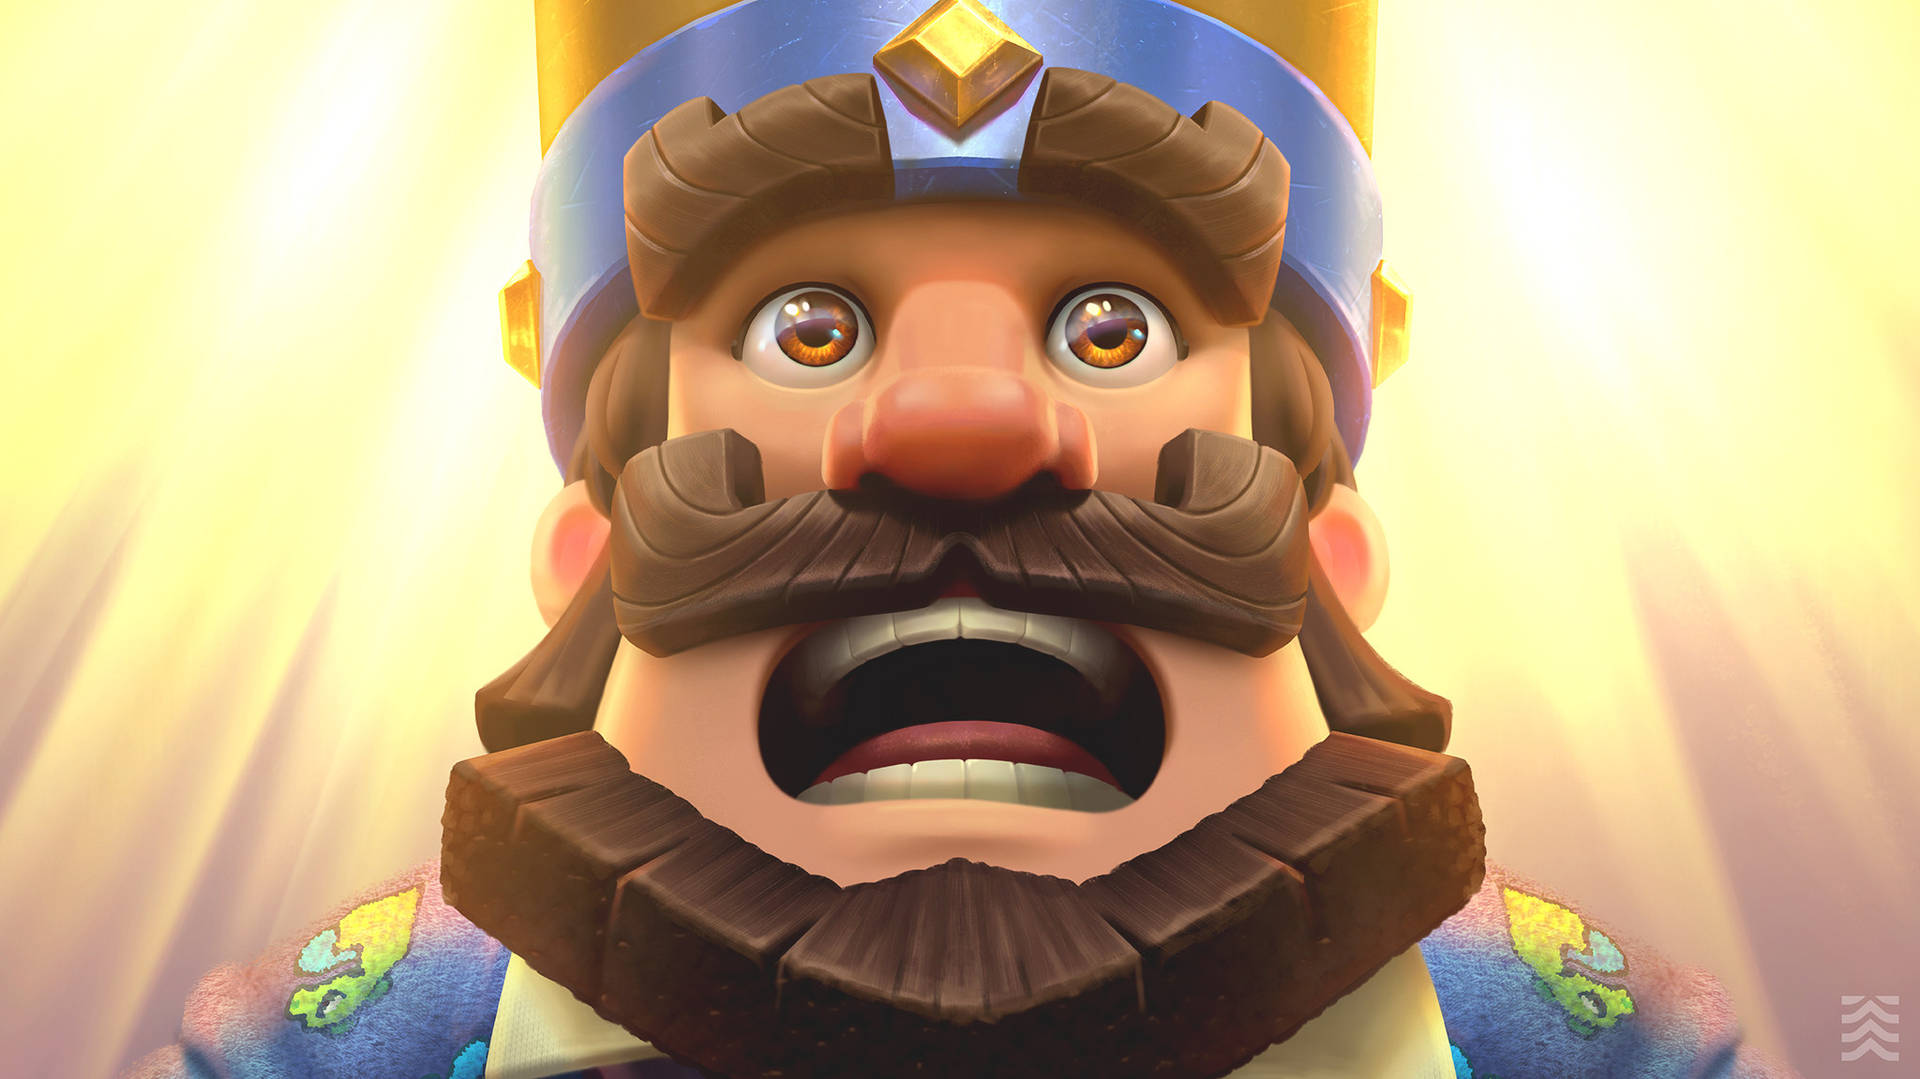 King From The Clash Royale Phone Game Looking Surprised Background